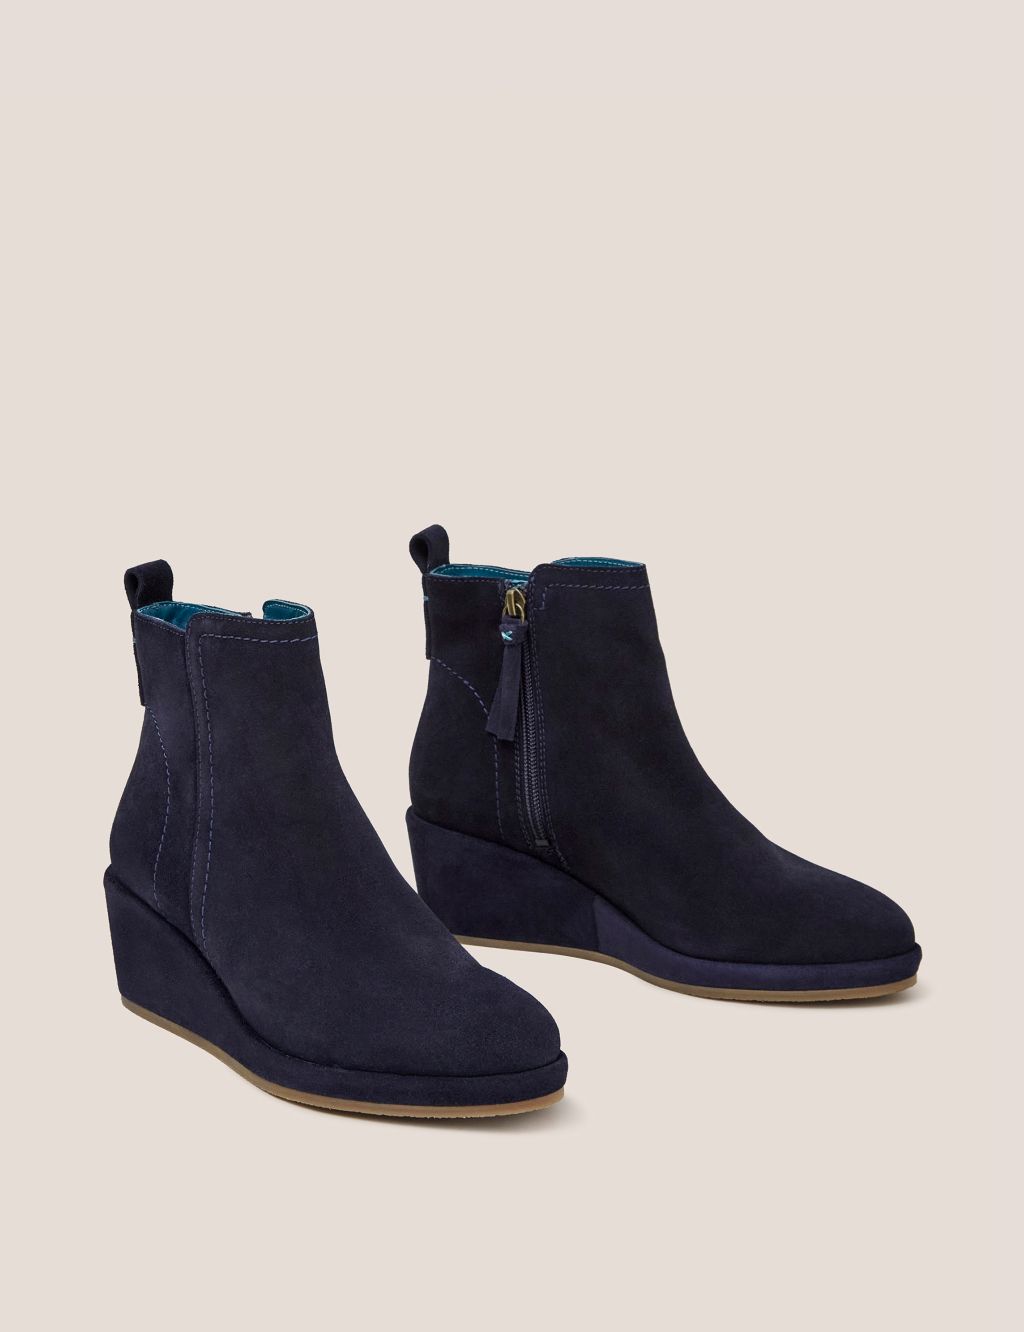 Suede Wedge Ankle Boots | White Stuff | M&S